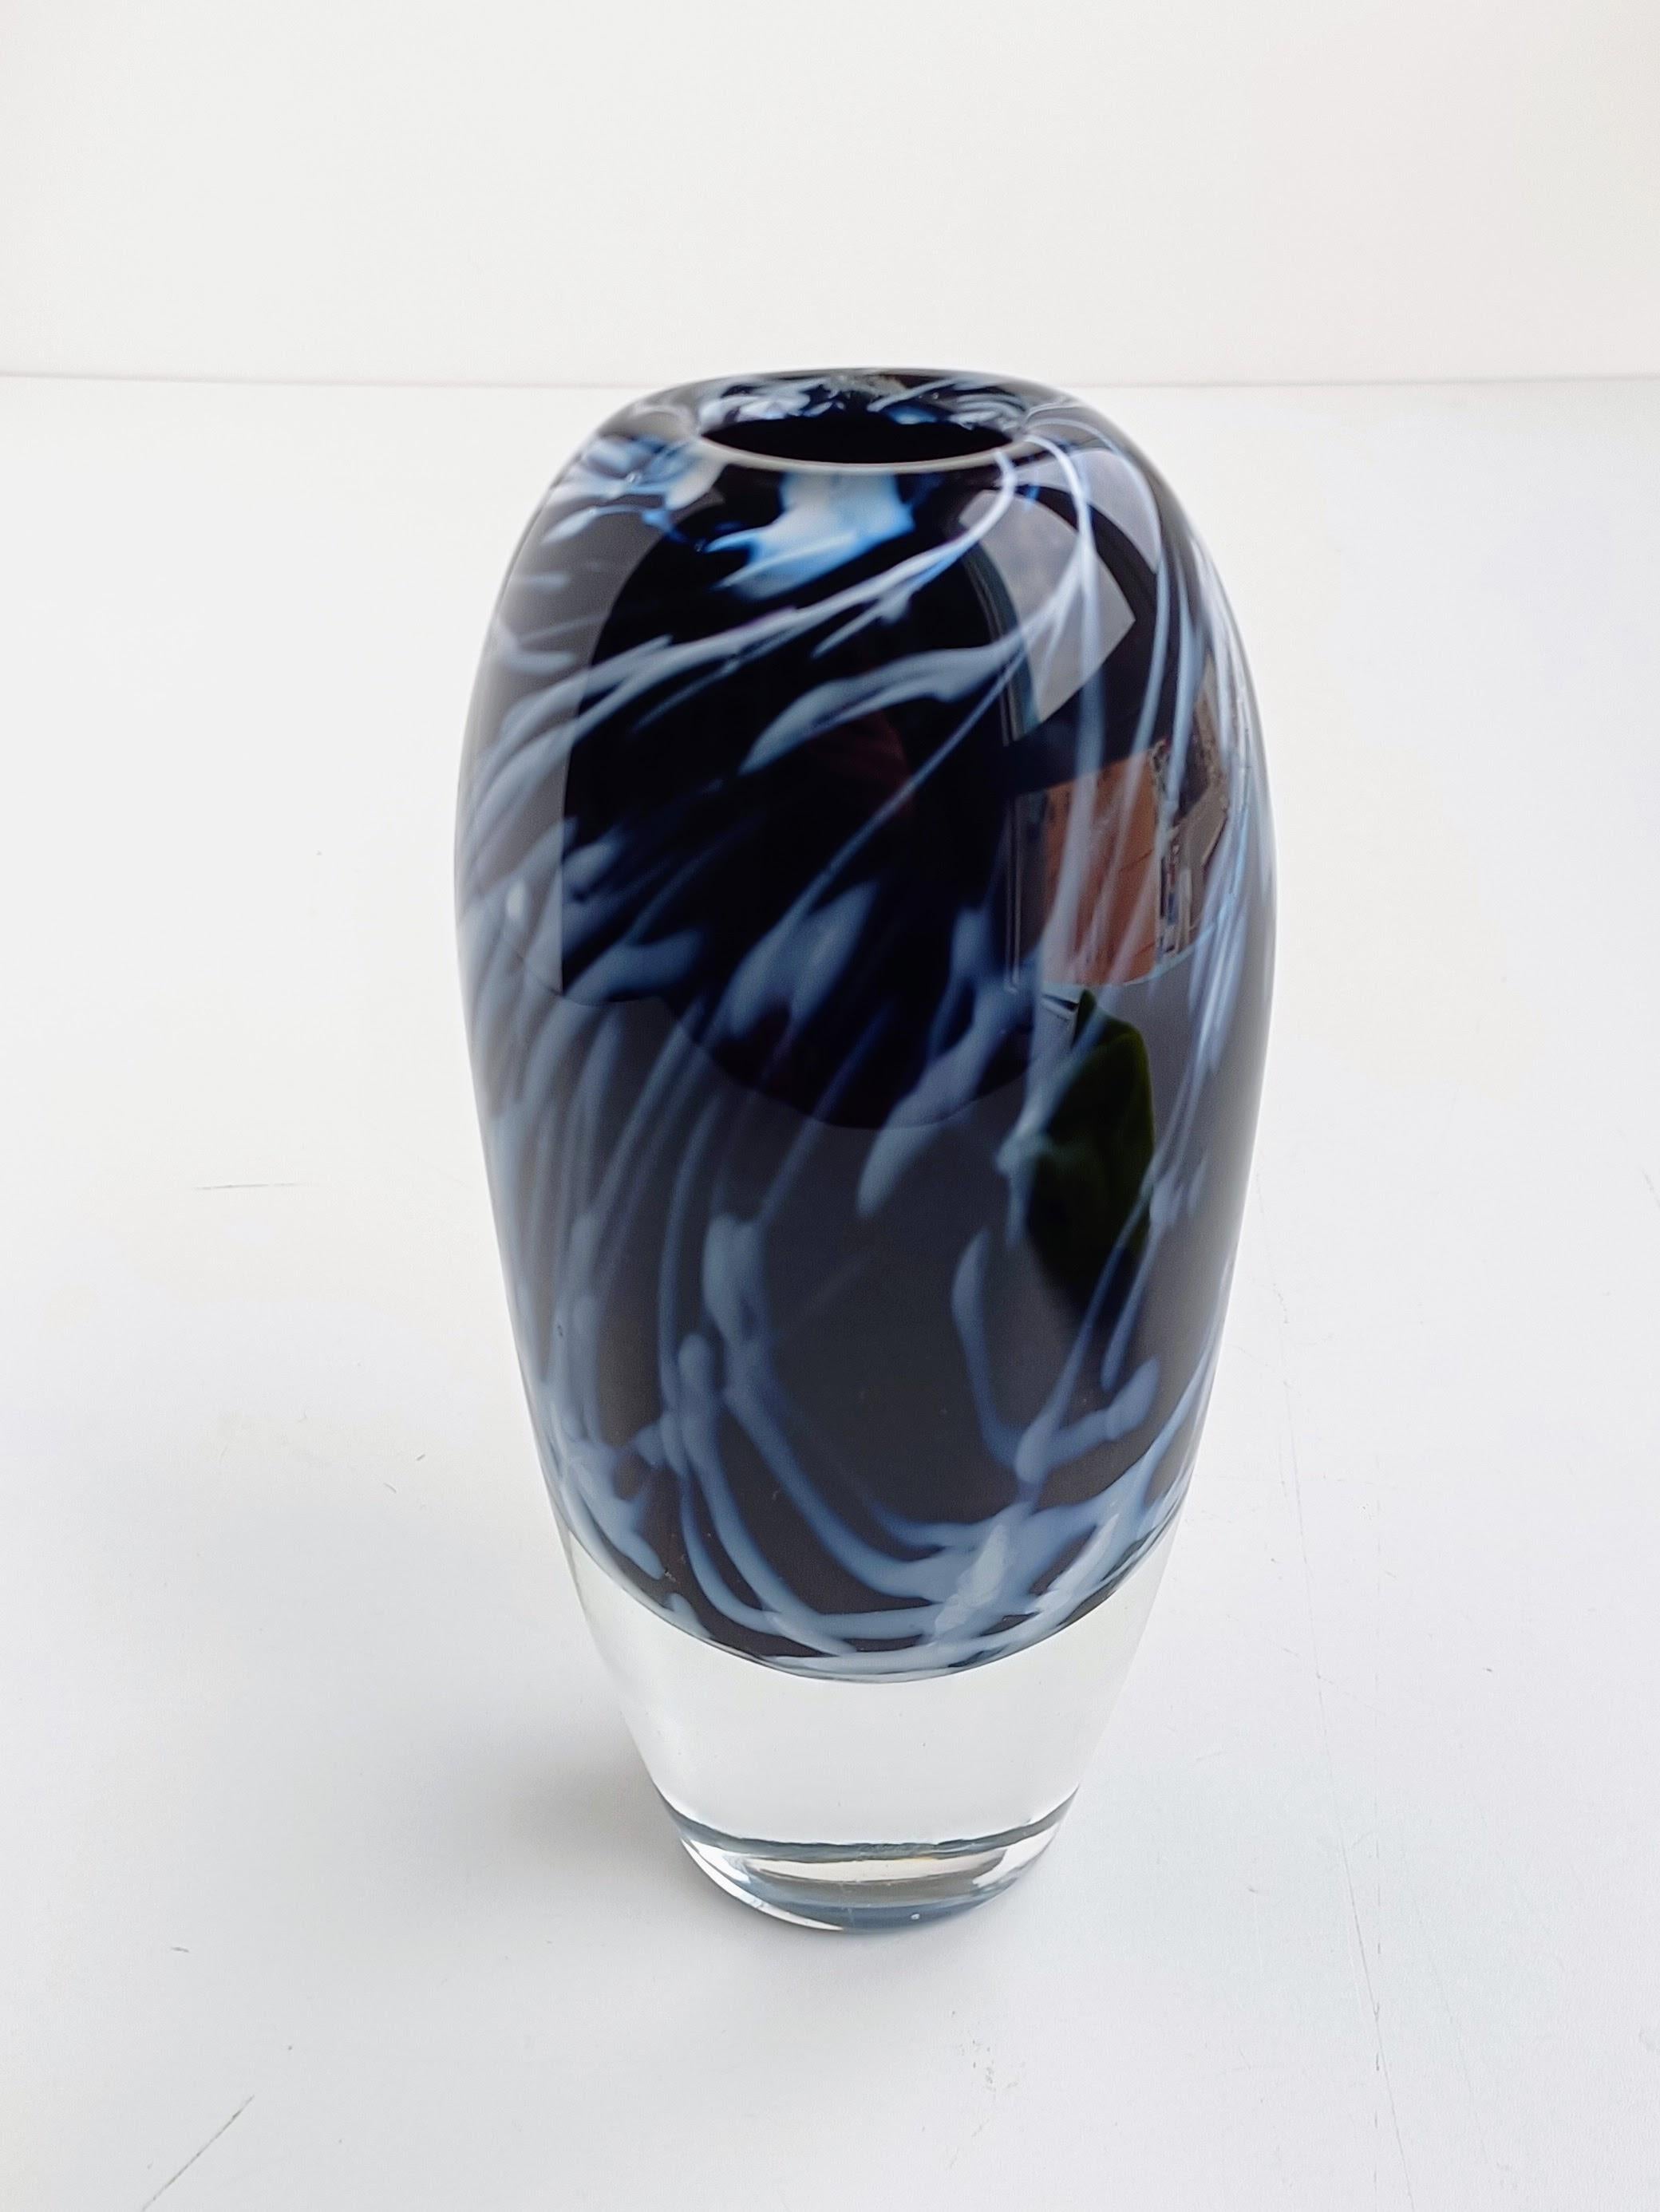 Scandinavian Modern Art Glass Orrefors by Walter Johansson, Signed and Numbered For Sale 5